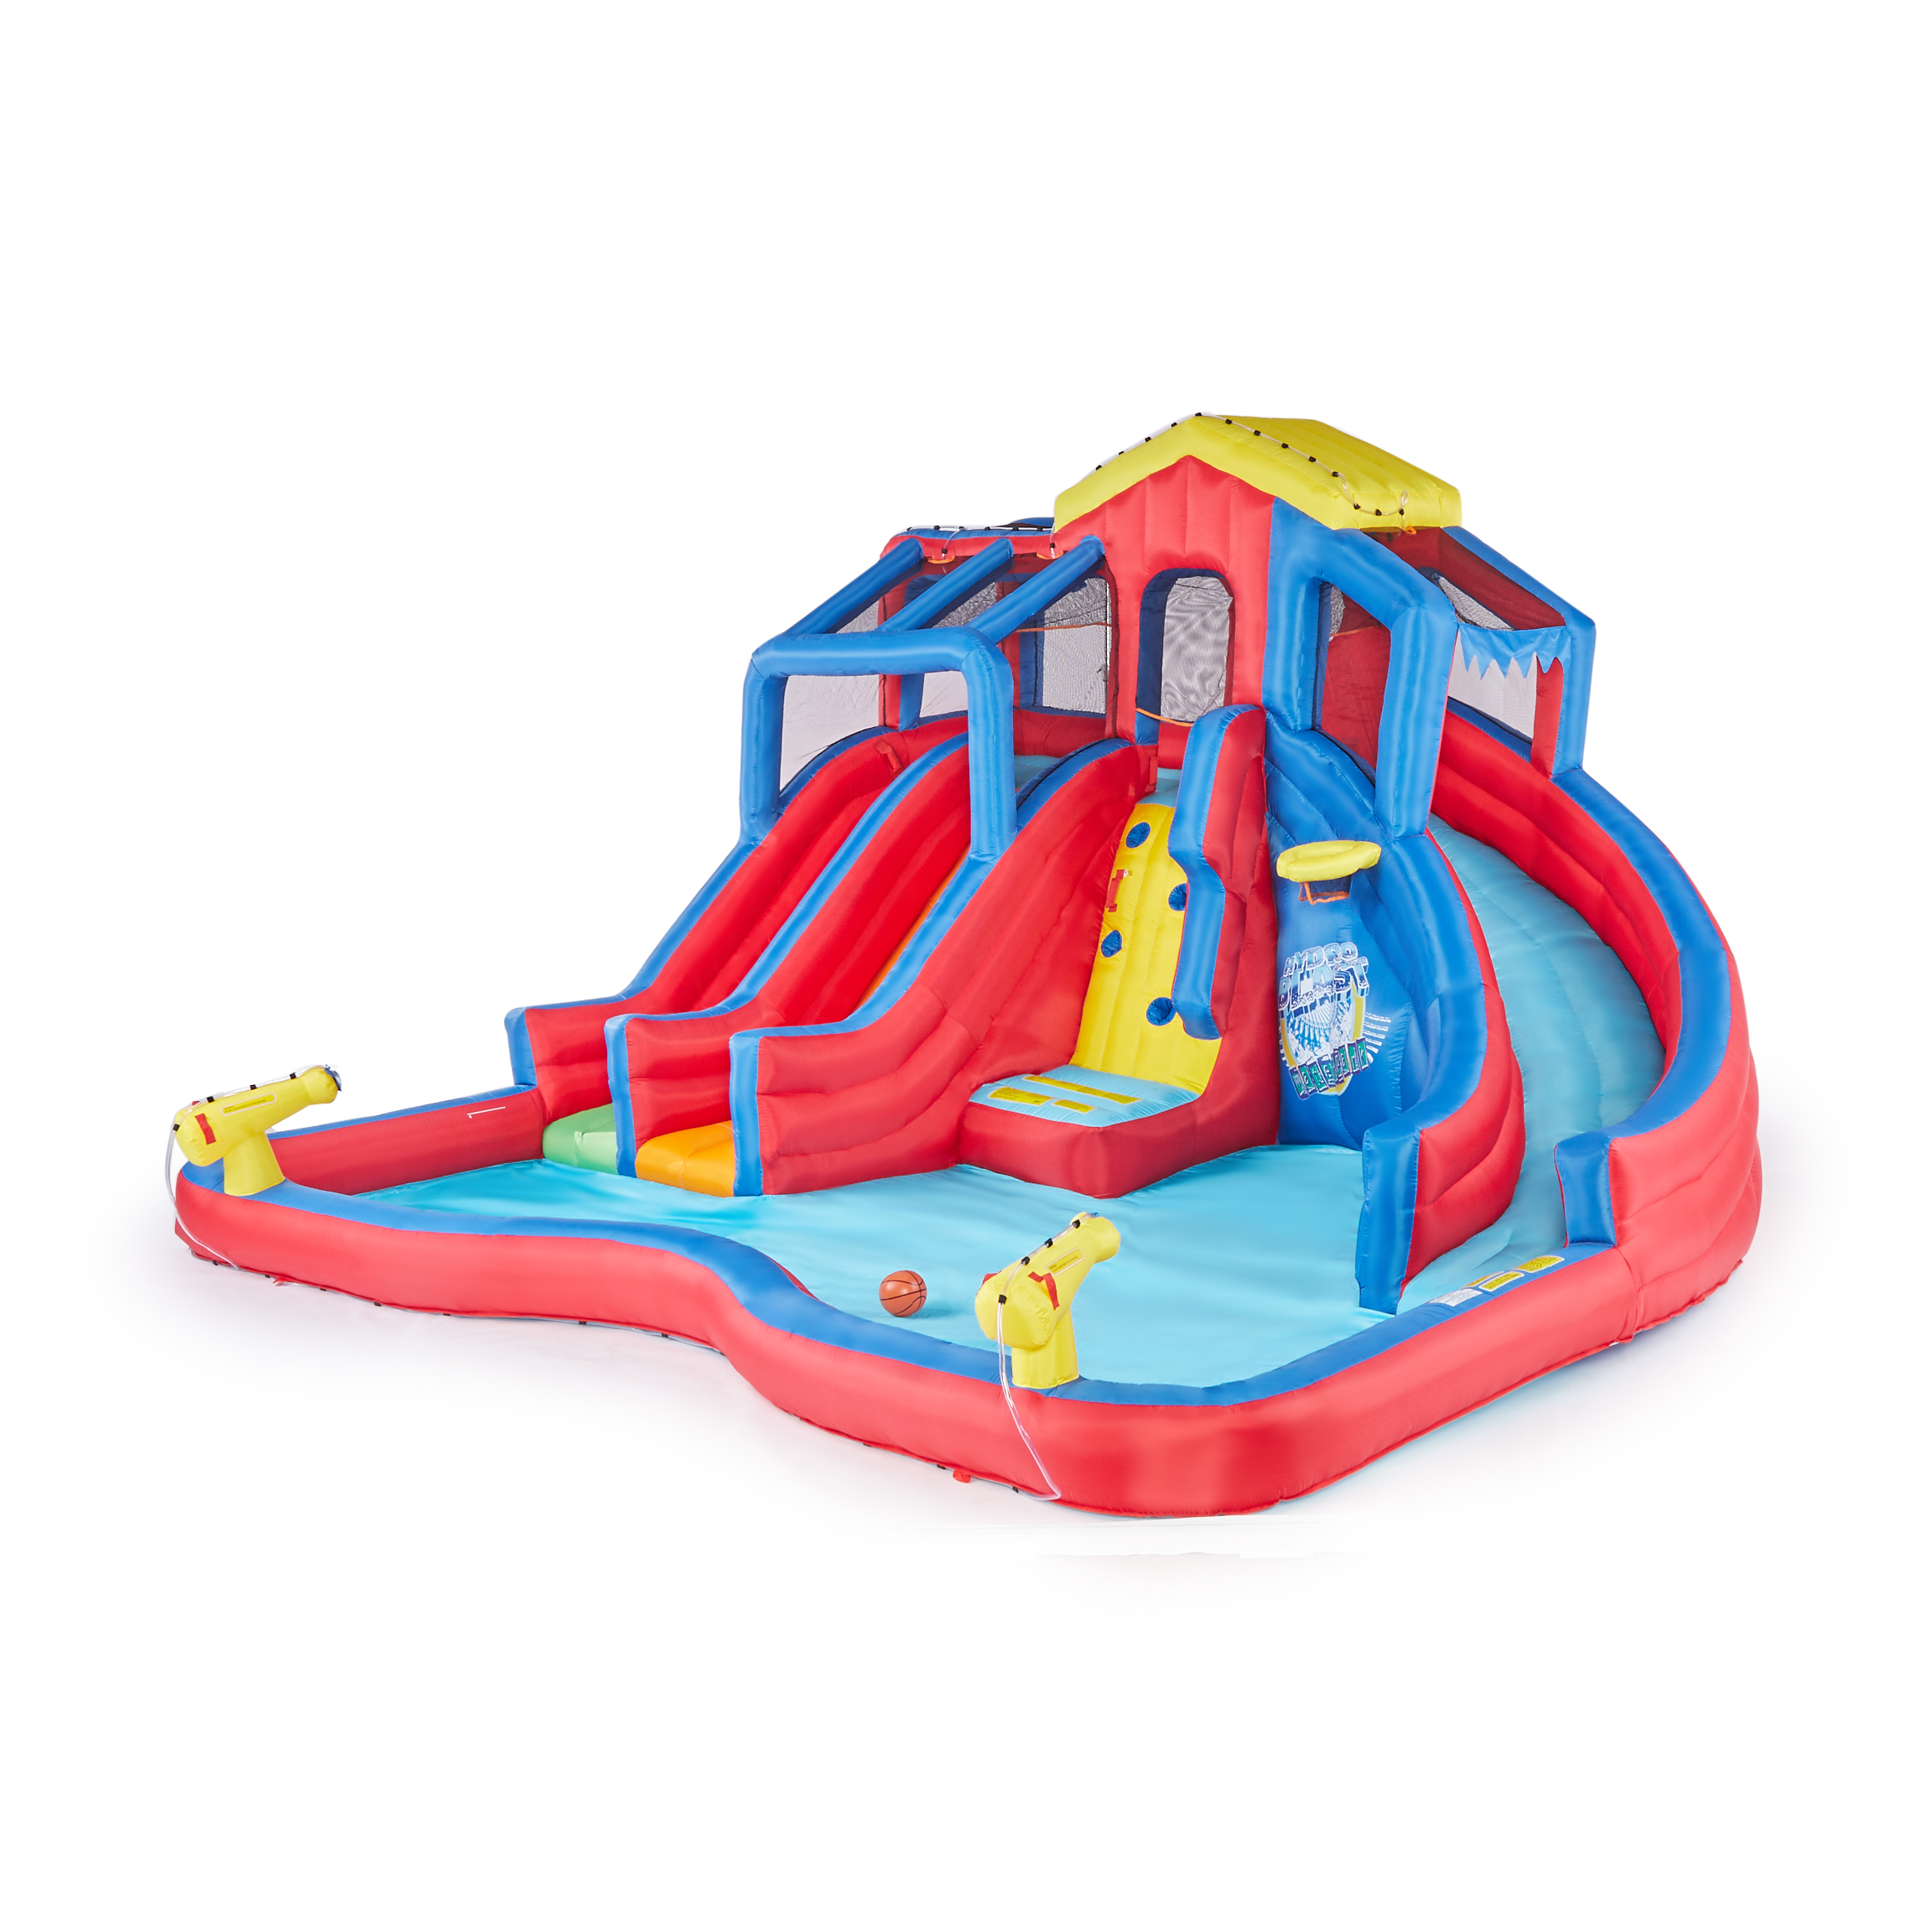 Banzai 35545 Hydro Blast Inflatable Water Park with Slides & Water Cannons